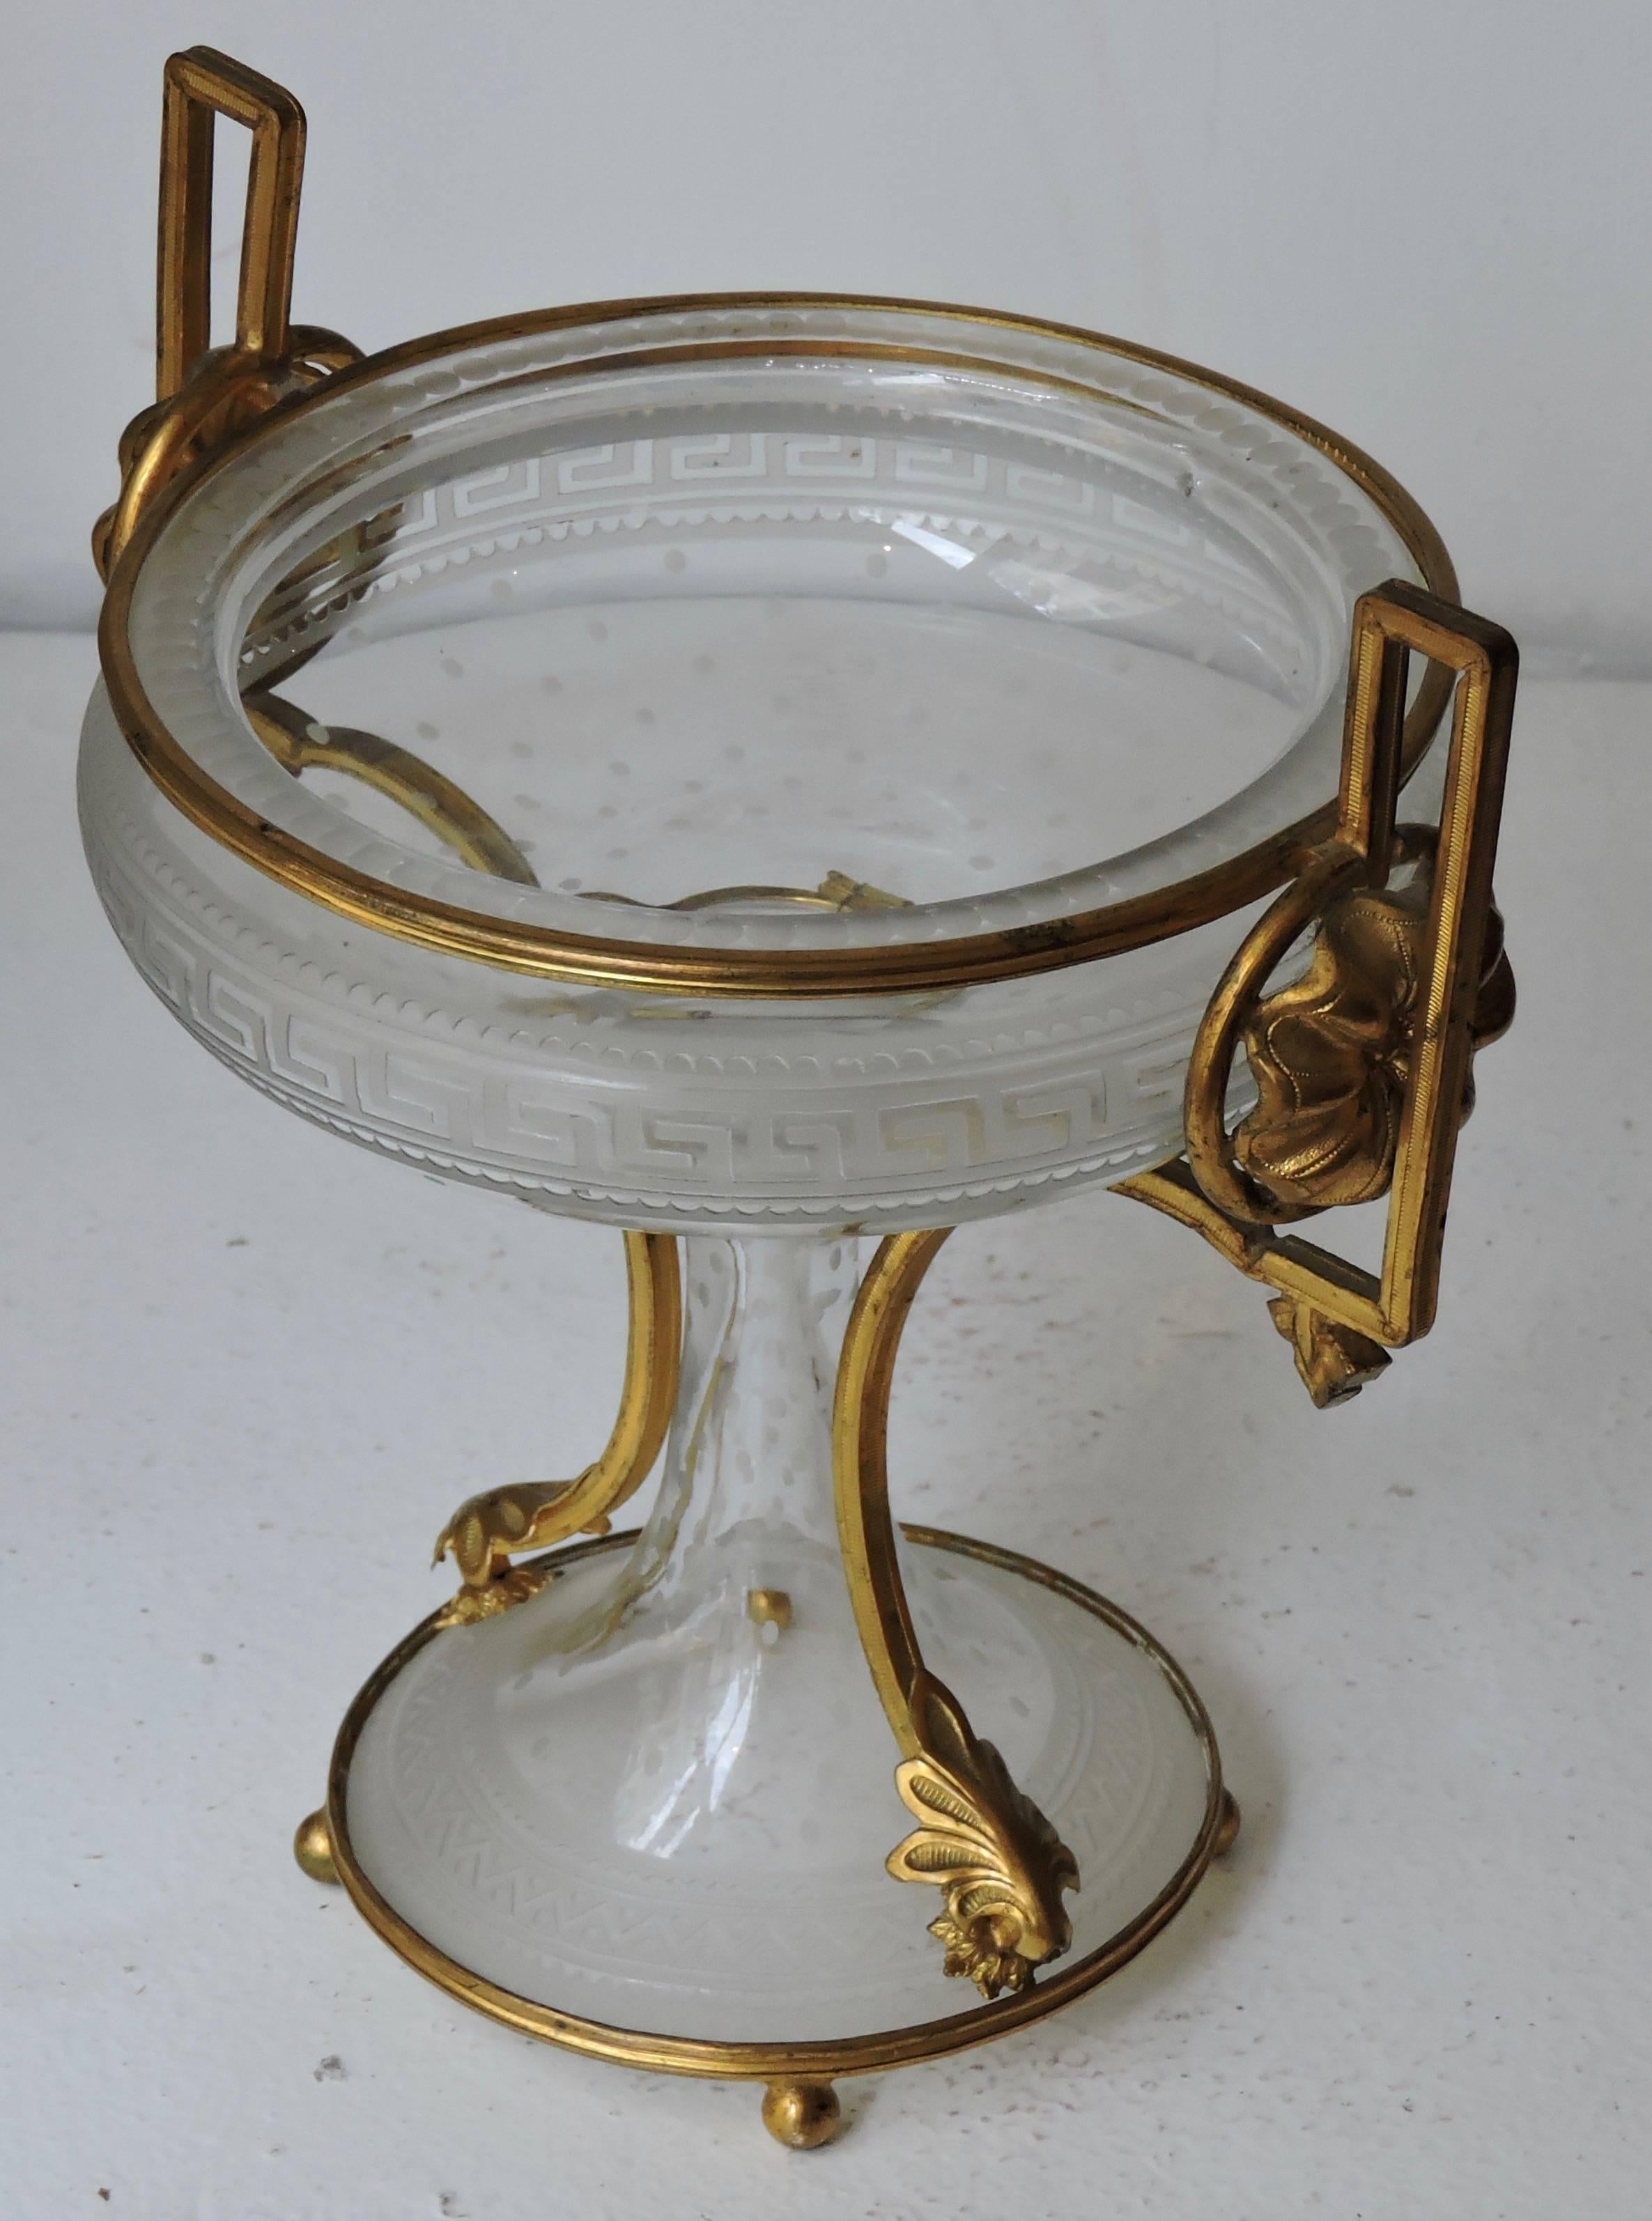 Neoclassical Revival Neoclassical Engraved and Ormolu-Mounted Crystal Cup, circa 1870